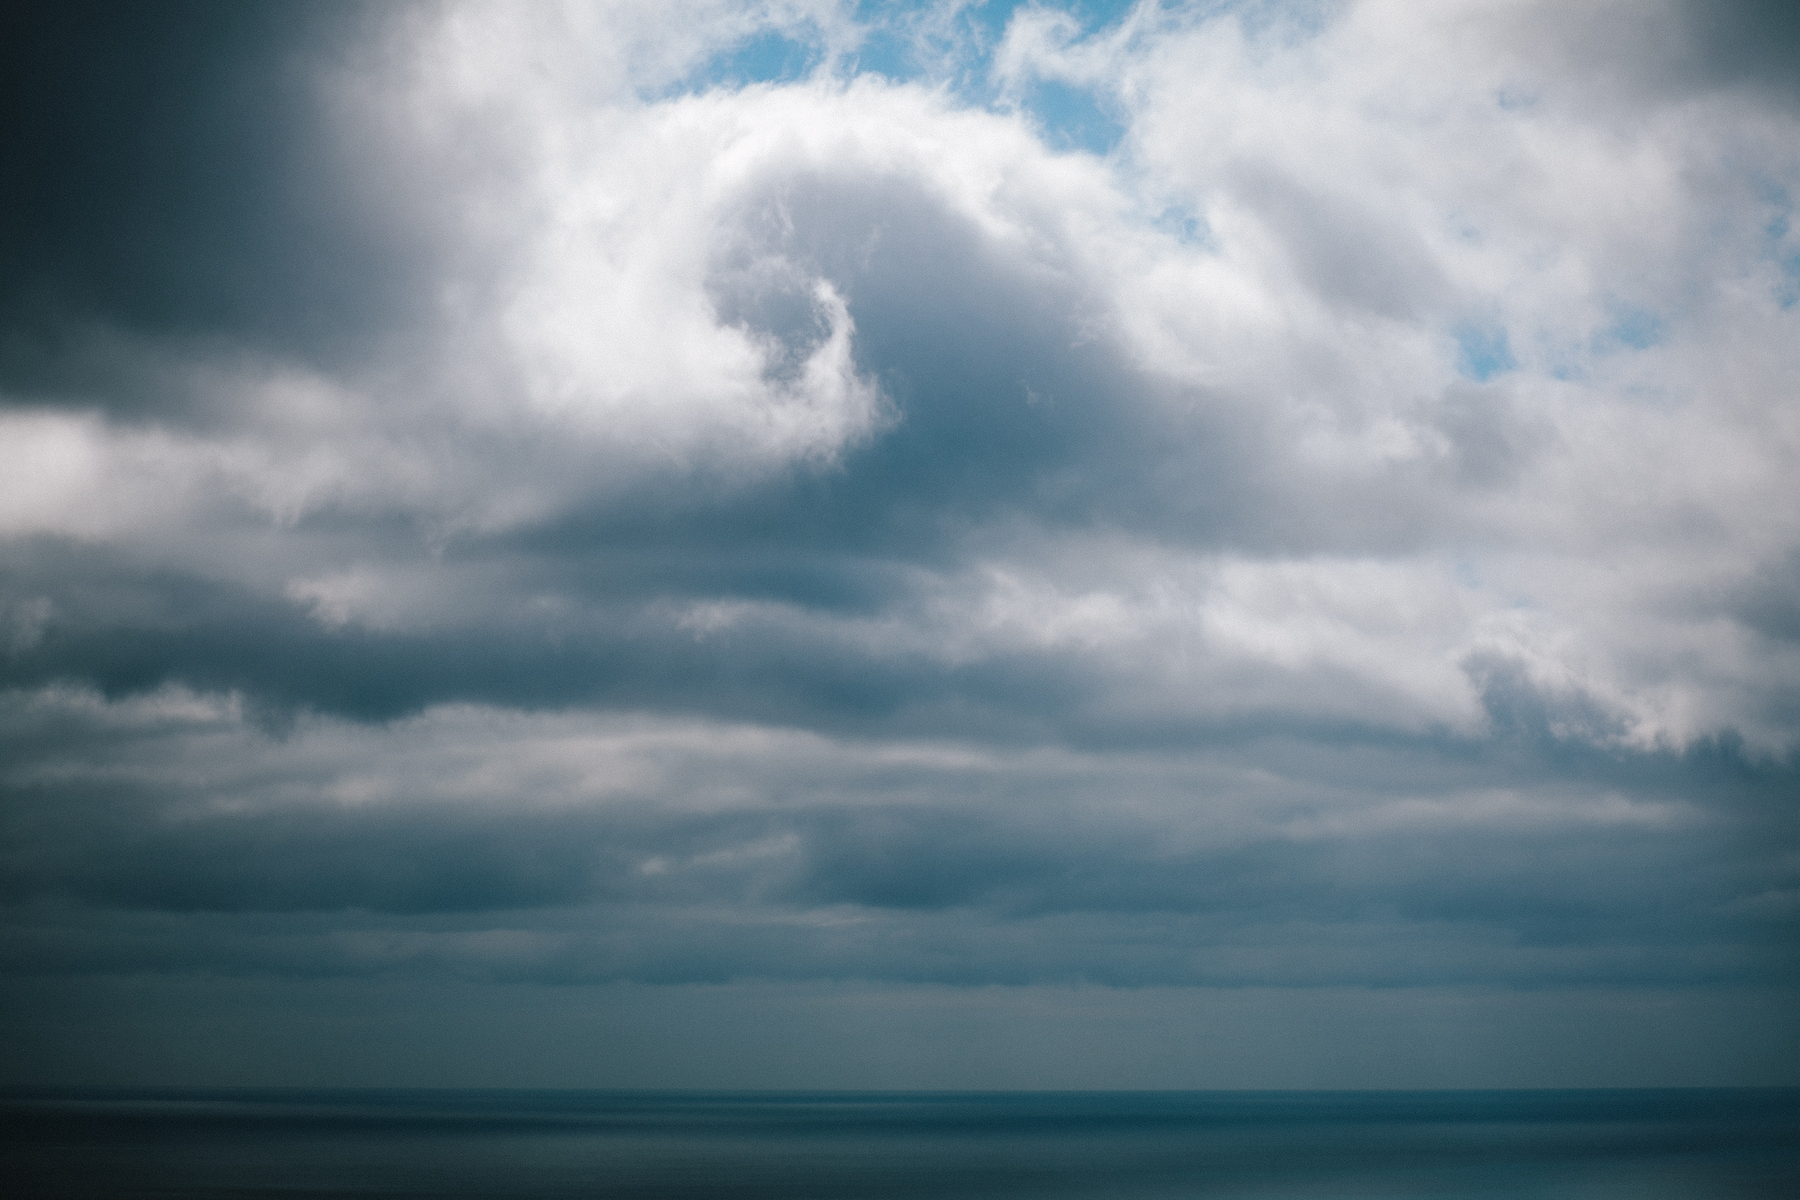 A serene seascape under a dramatic sky with various cloud formations, extending from fluffy white to ominous grey.